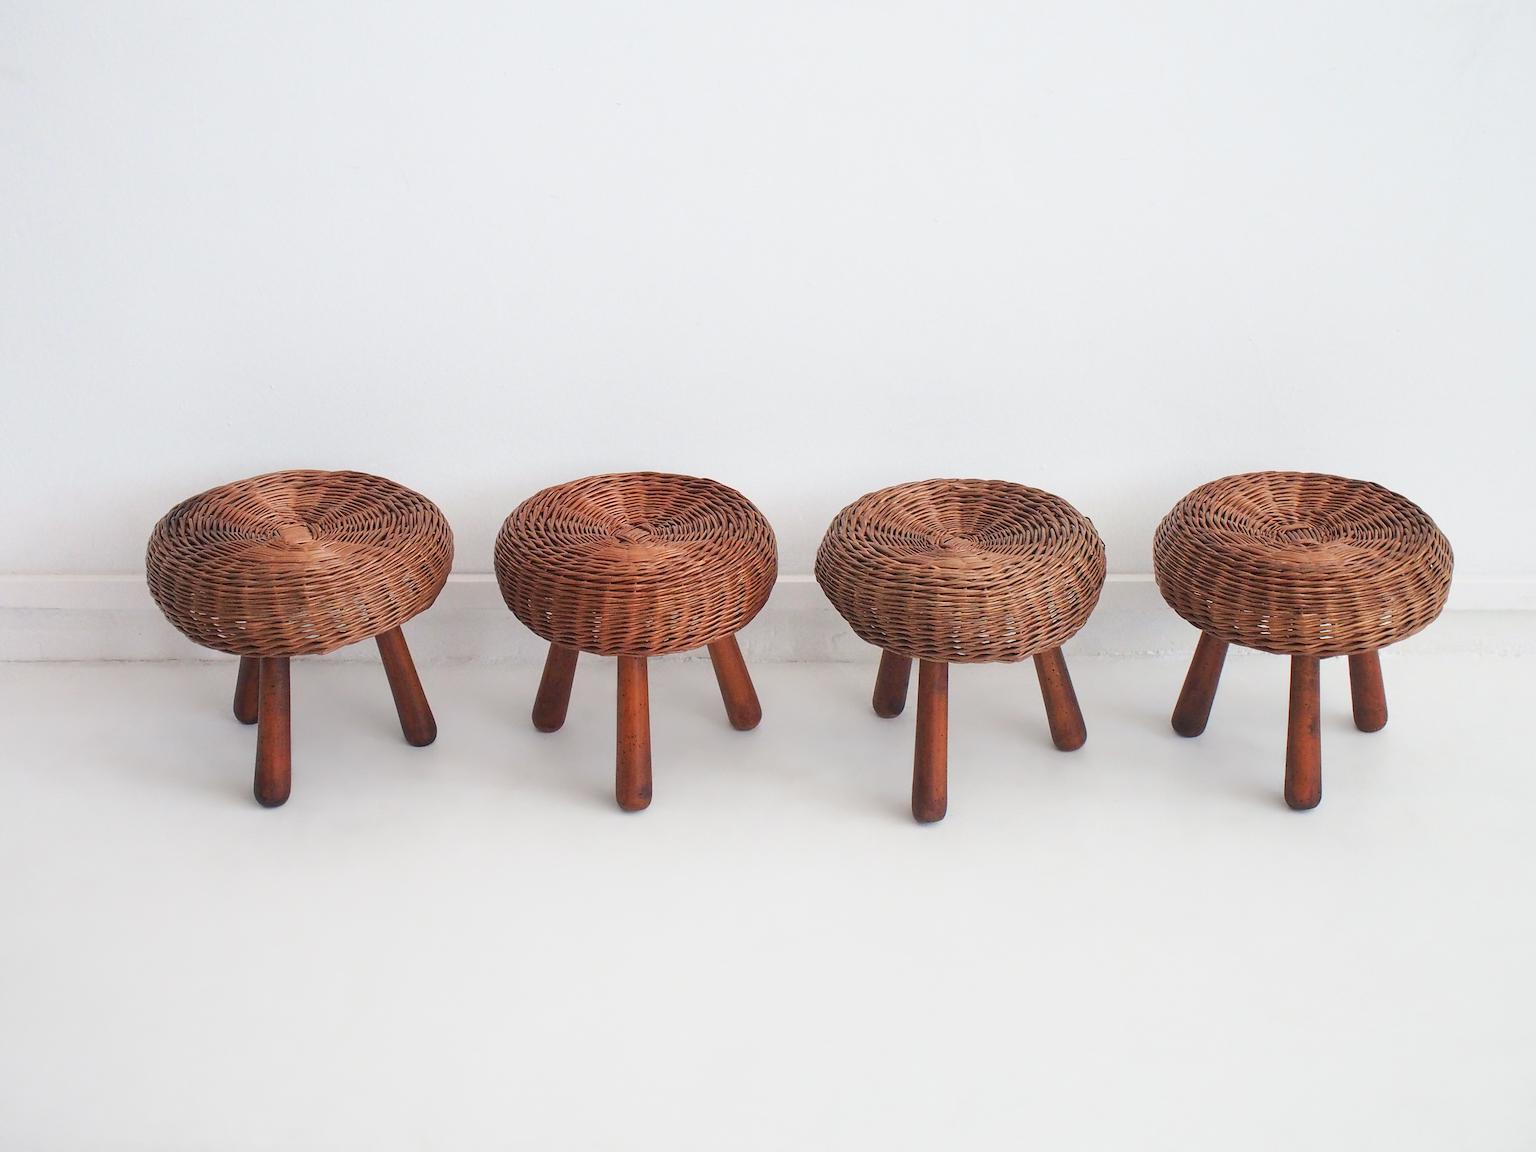 Set of four wicker stools designed by Tony Paul and produced in the United States in the '50s. These iconic sturdy stools feature a hand-woven rattan seat on top of three solid beech wood legs. Some age-related wear, darkening, scratches.